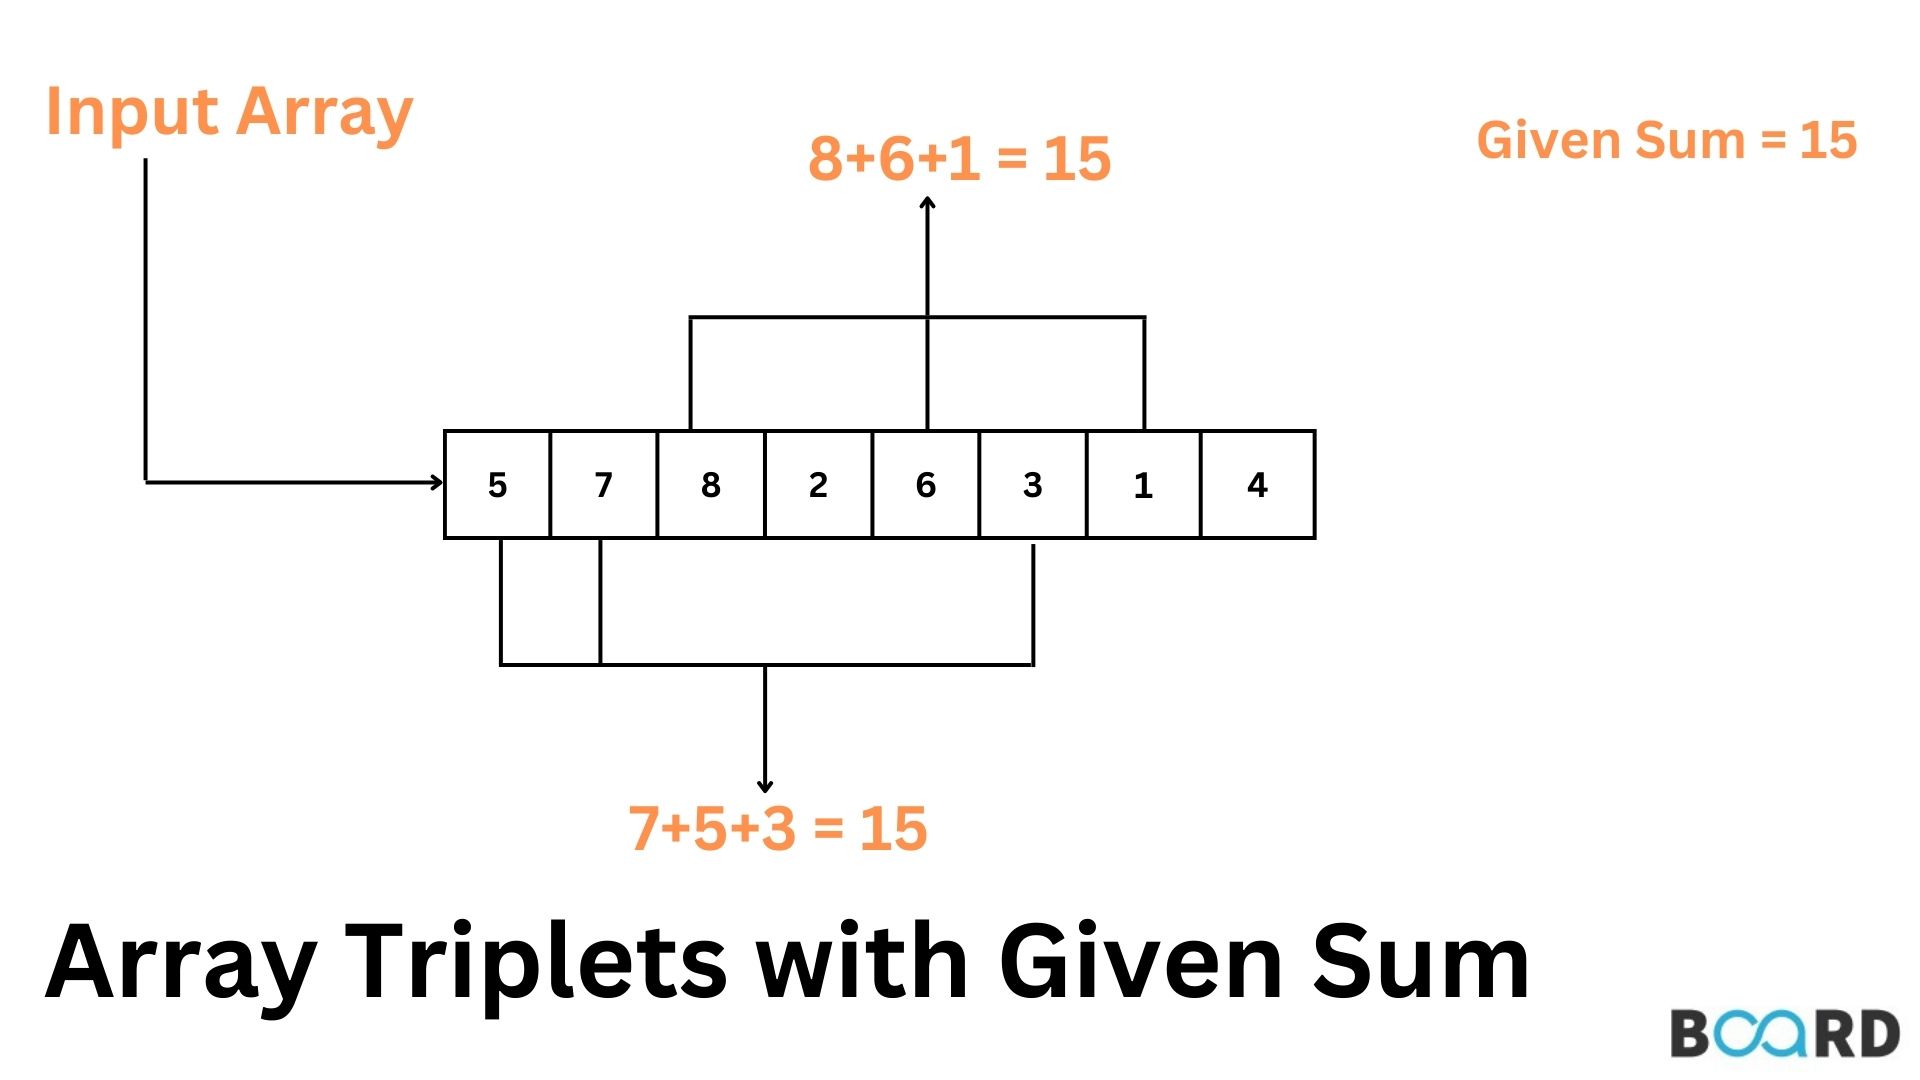 Finding Array Triplets with Given Sum